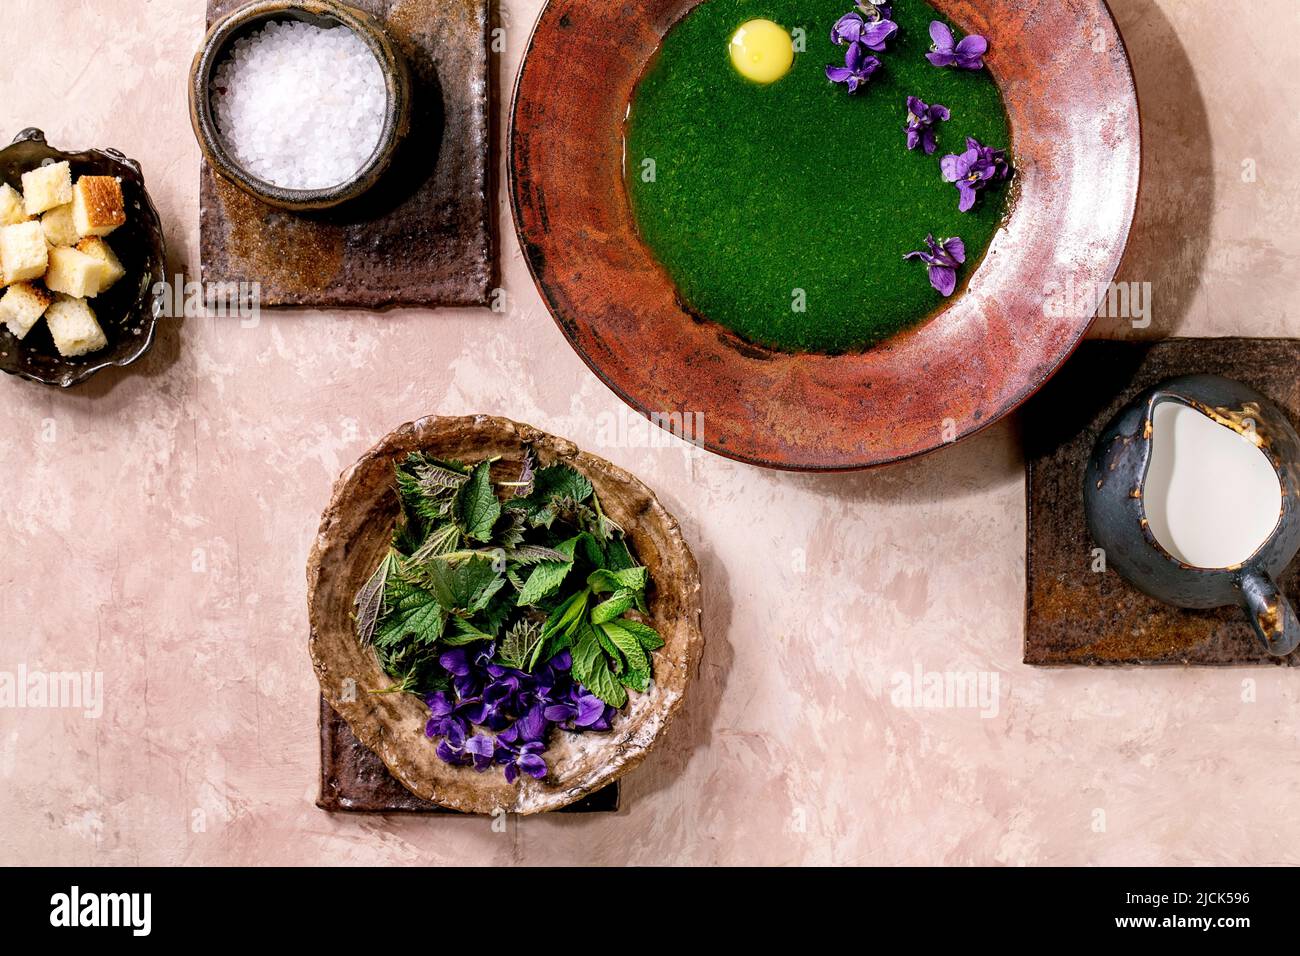 Plate of spring herbal nettle puree soup, served with quail yolk, violettes flowers, cream, croutons and young nettle leaves on brown ceramic tiles. P Stock Photo